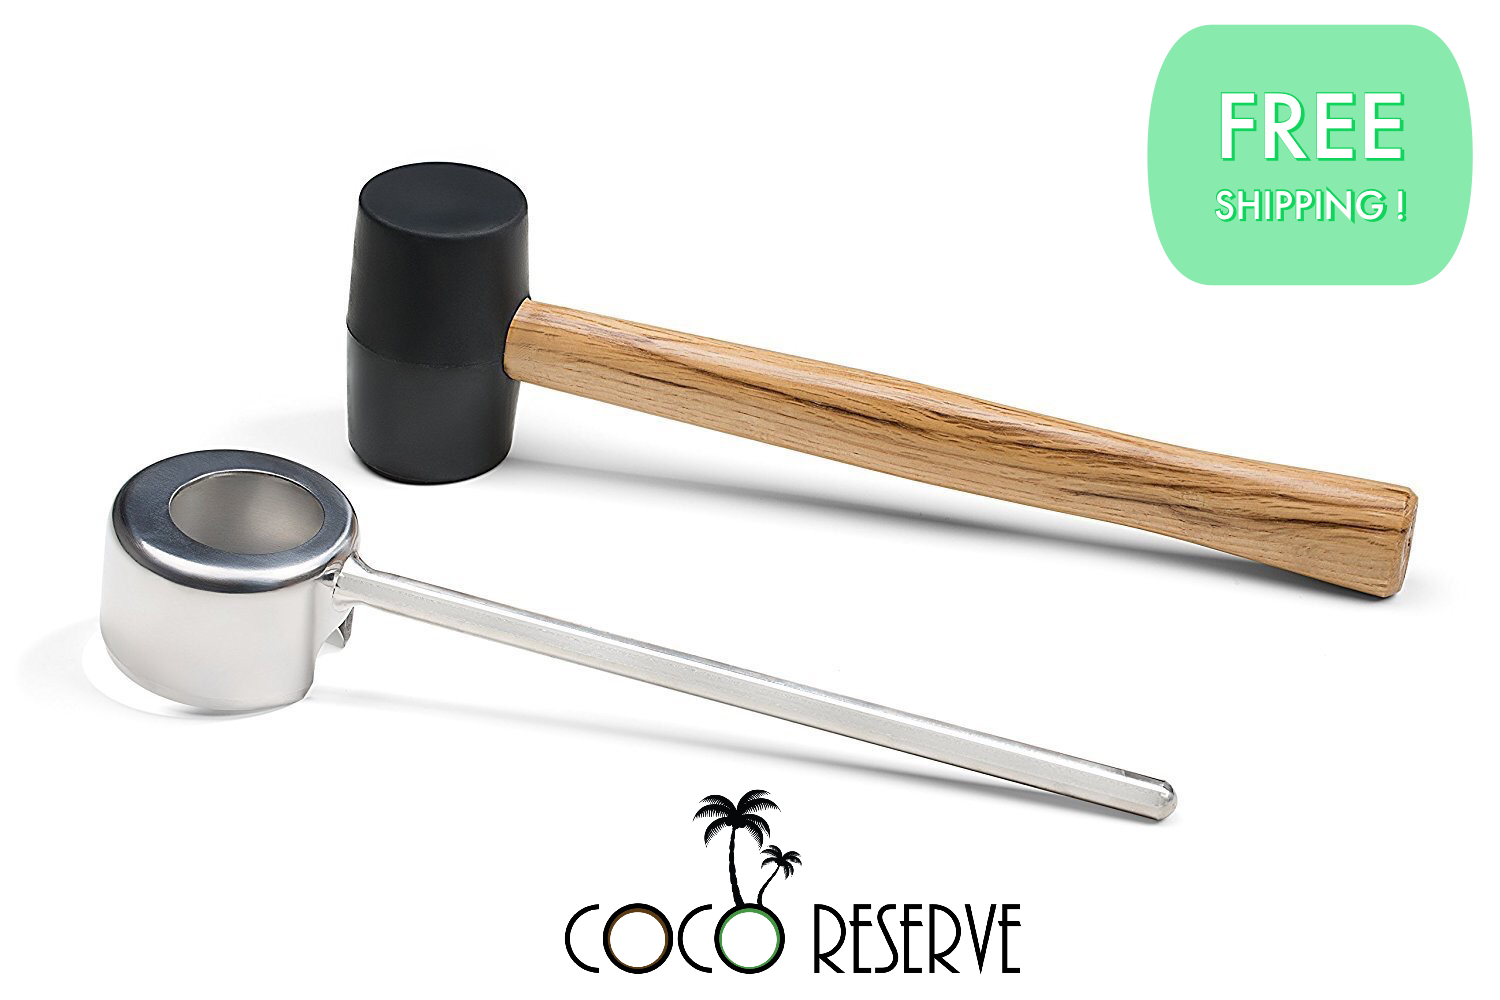 Coconut Opening Tool Kit - Wide Mouth - Mallet included